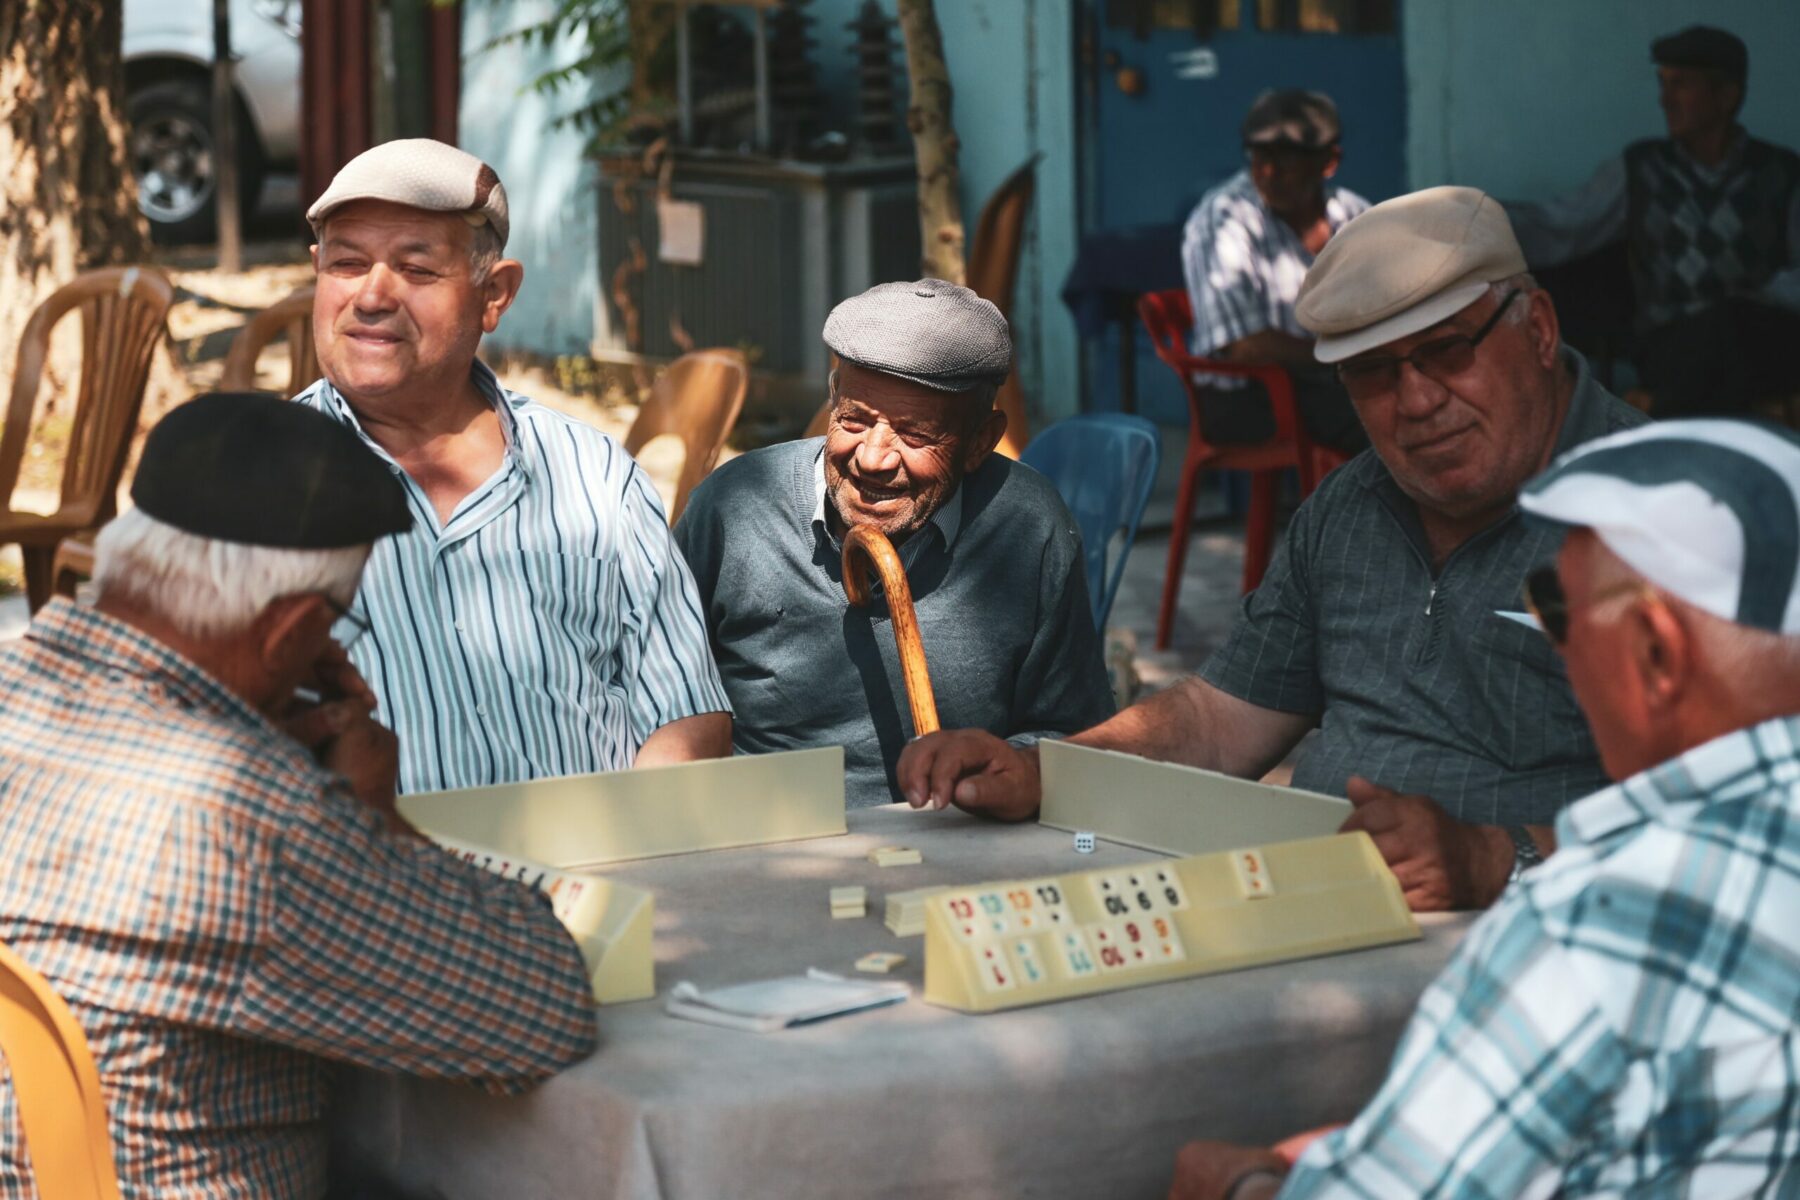 Group of elderly mean playing a game.